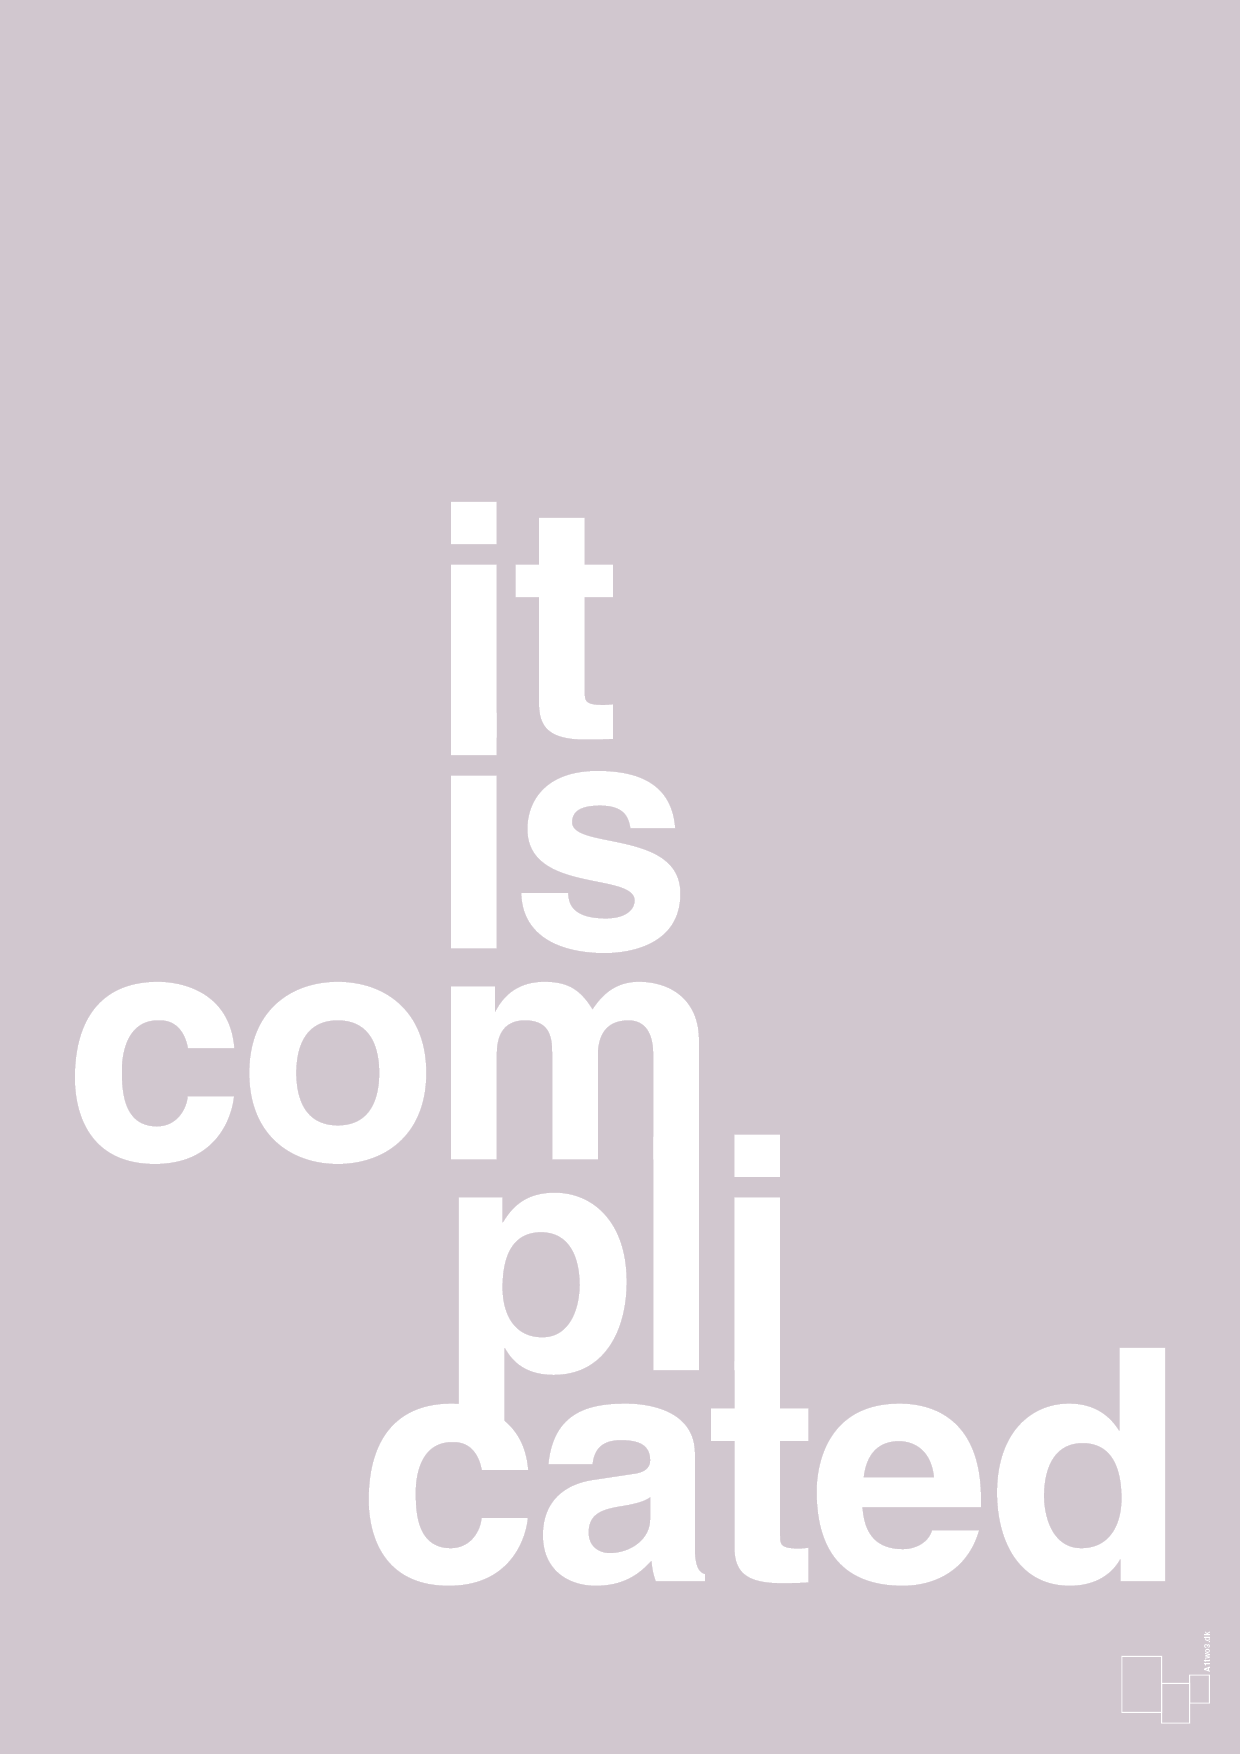 it is complicated - Plakat med Ordsprog i Dusty Lilac